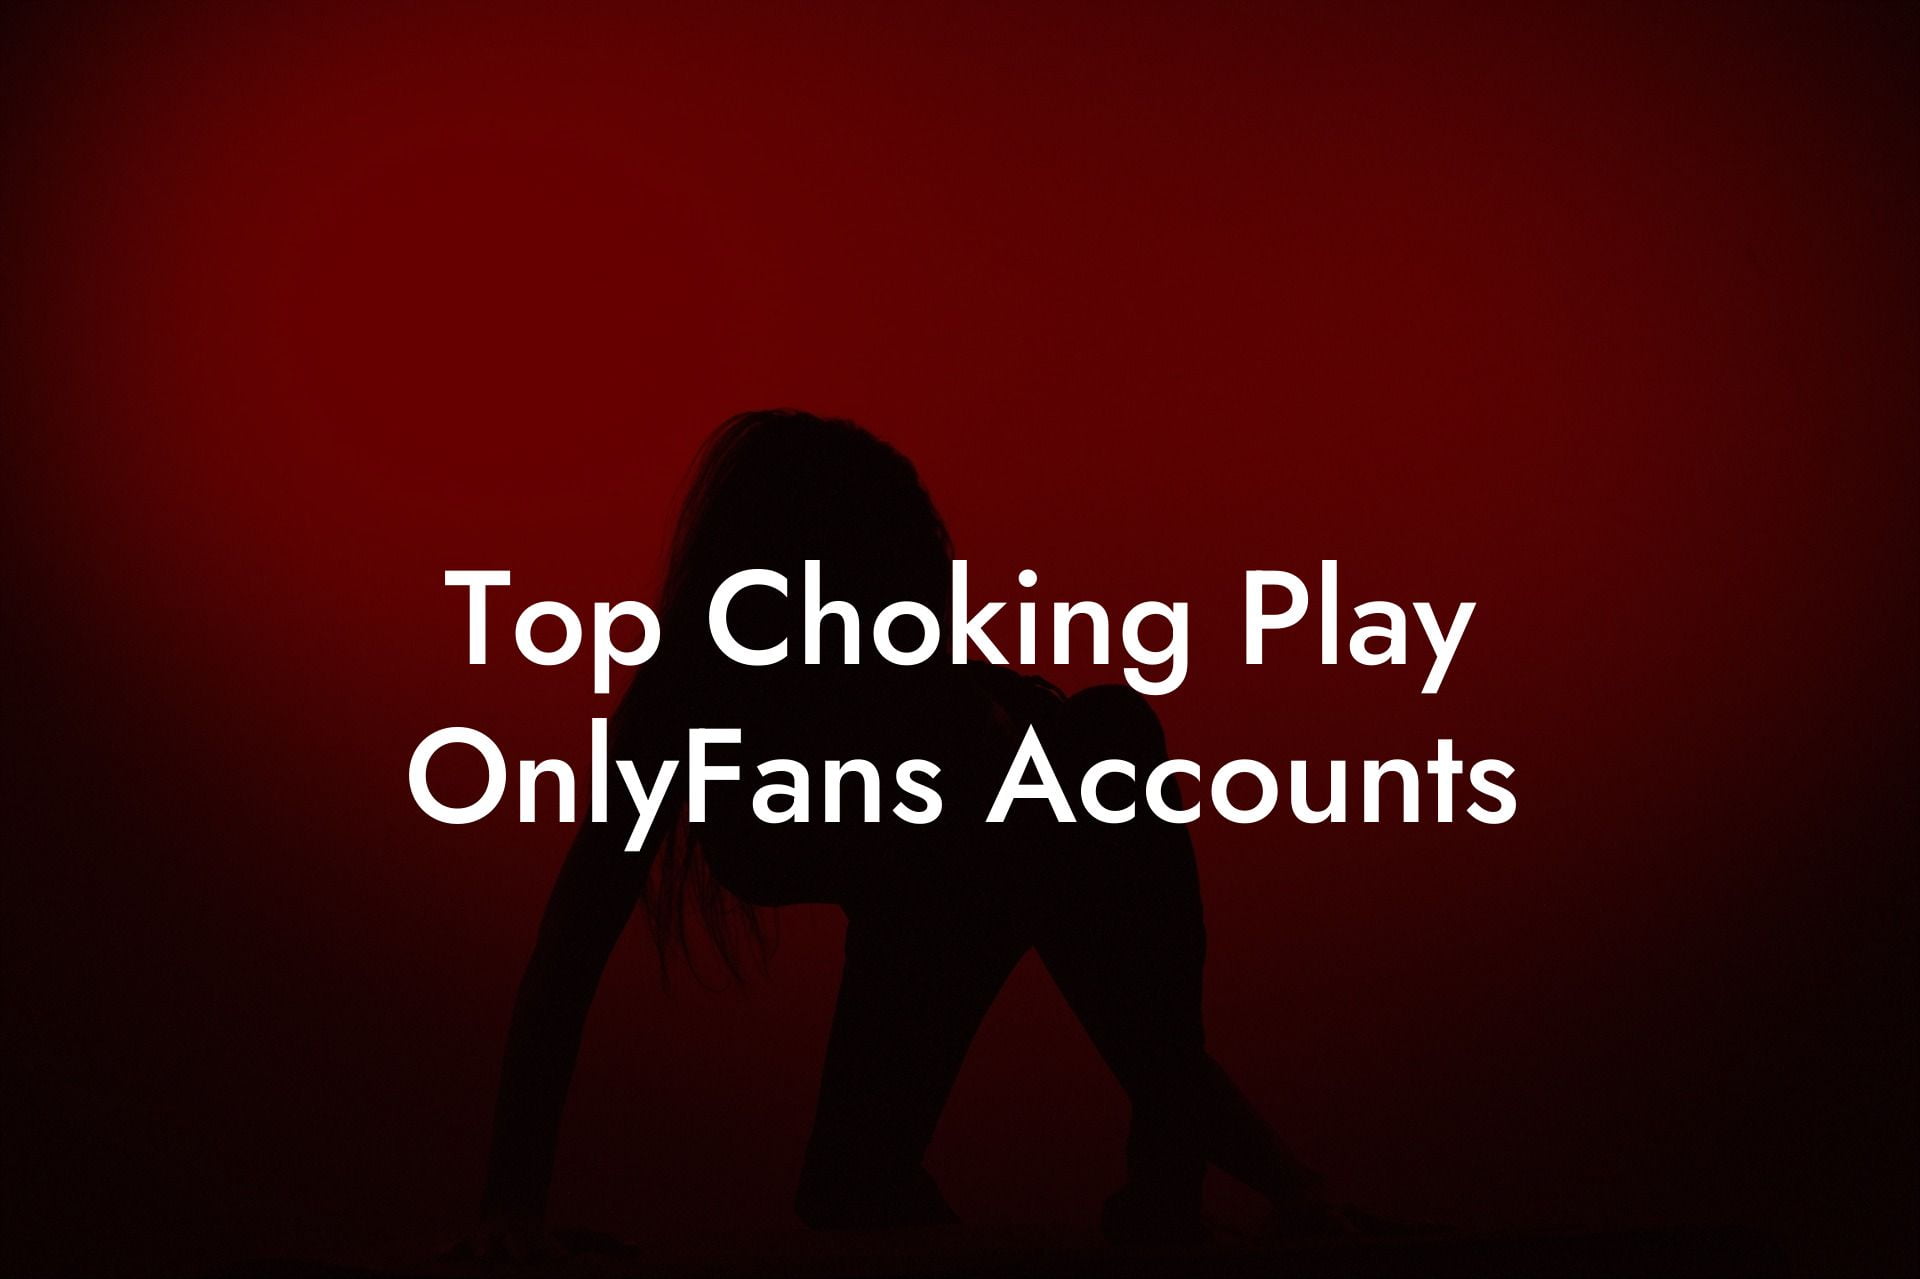 Top Choking Play OnlyFans Accounts